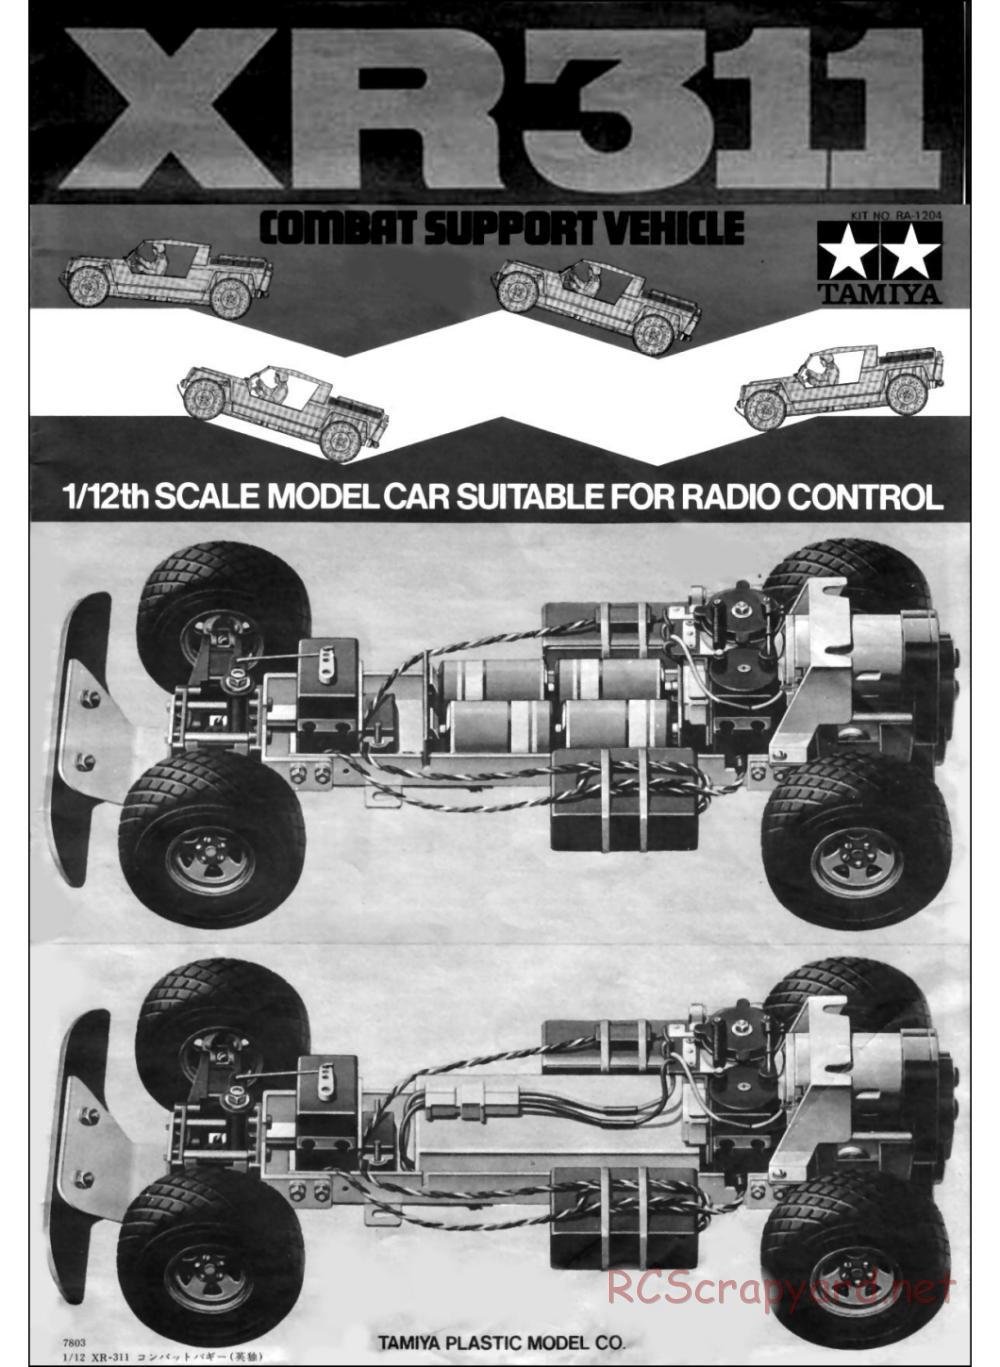 Tamiya - XR311 Combat Support Vehicle (1977) Chassis - Manual - Page 1